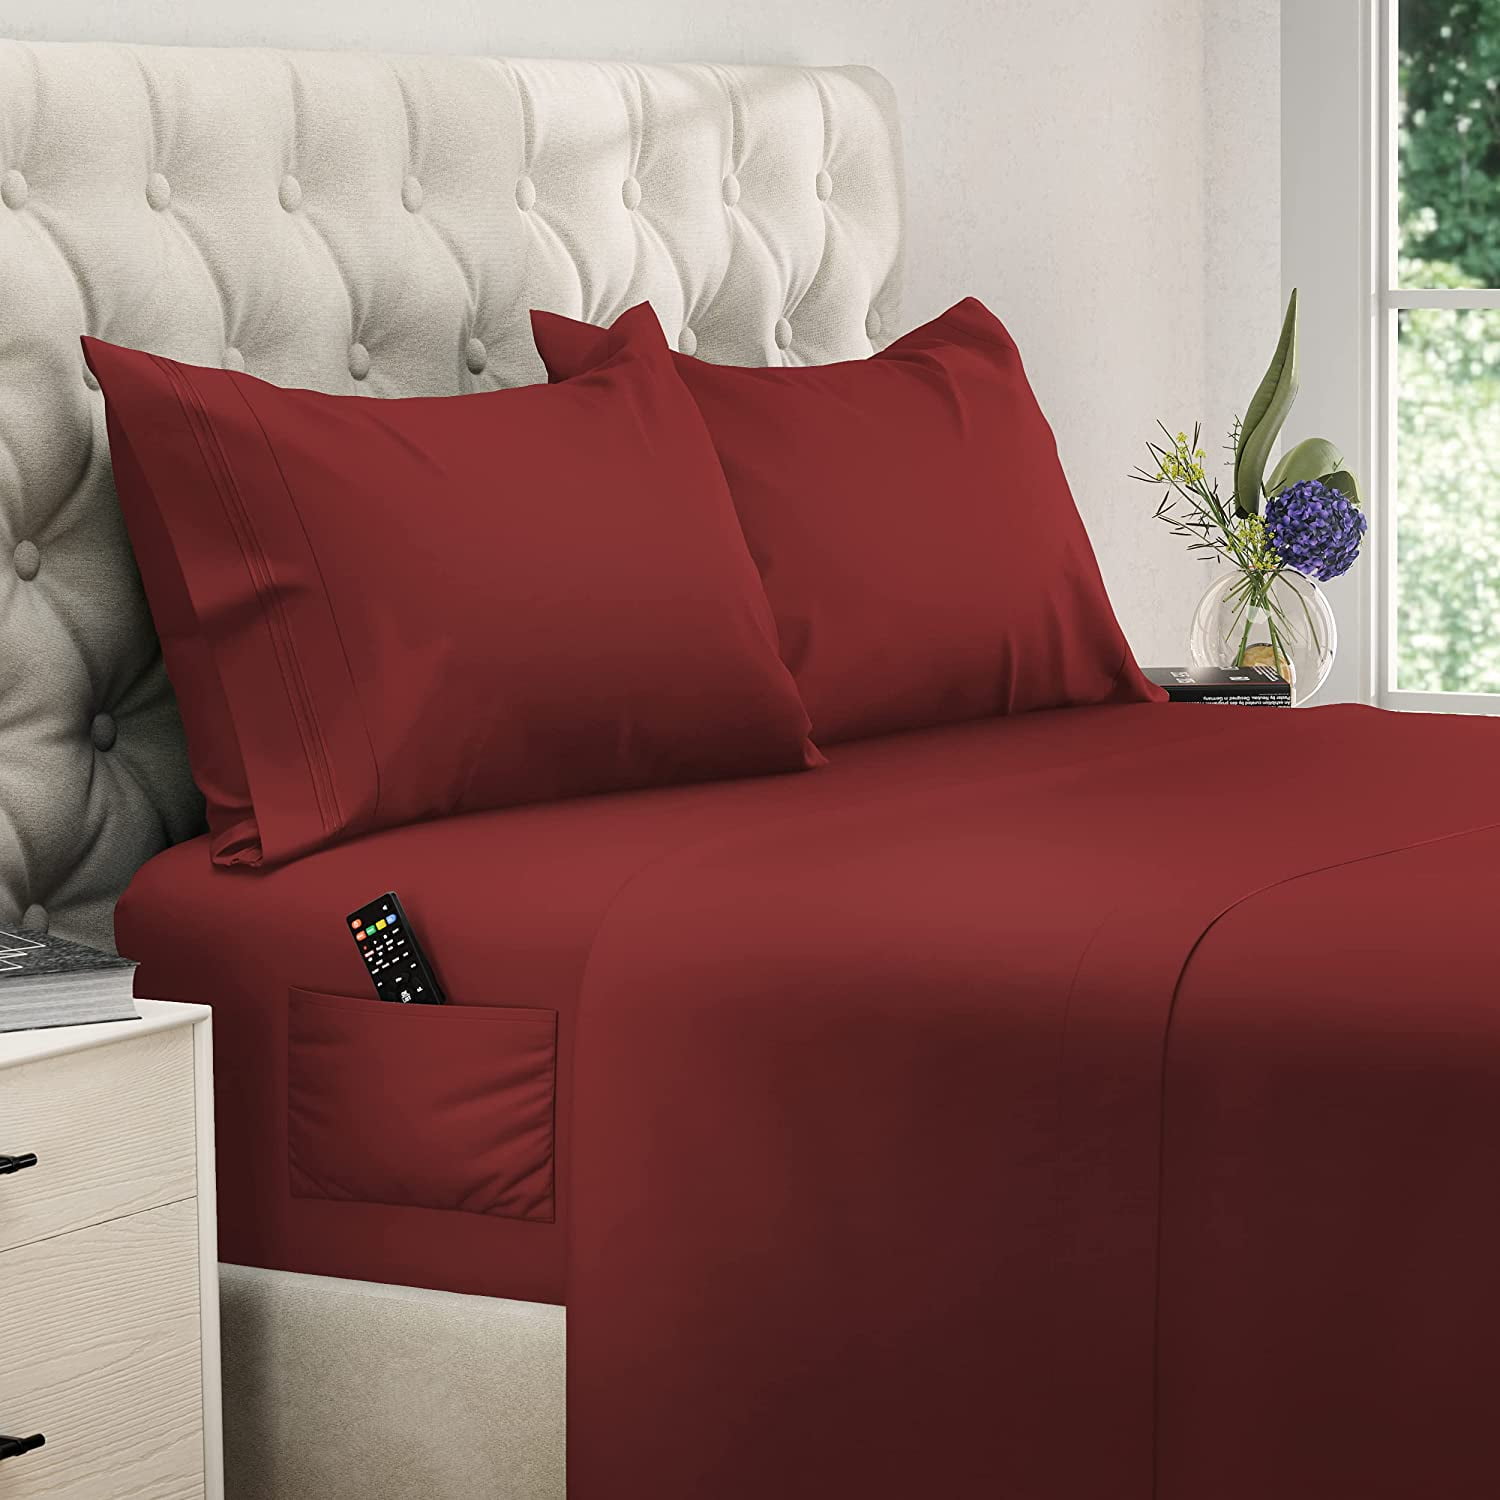 DREAMCARE - Bed Sheets Set - King Size Sheet with Side Pocket - 4pcs Set, 21 Inches, Burgundy, Red